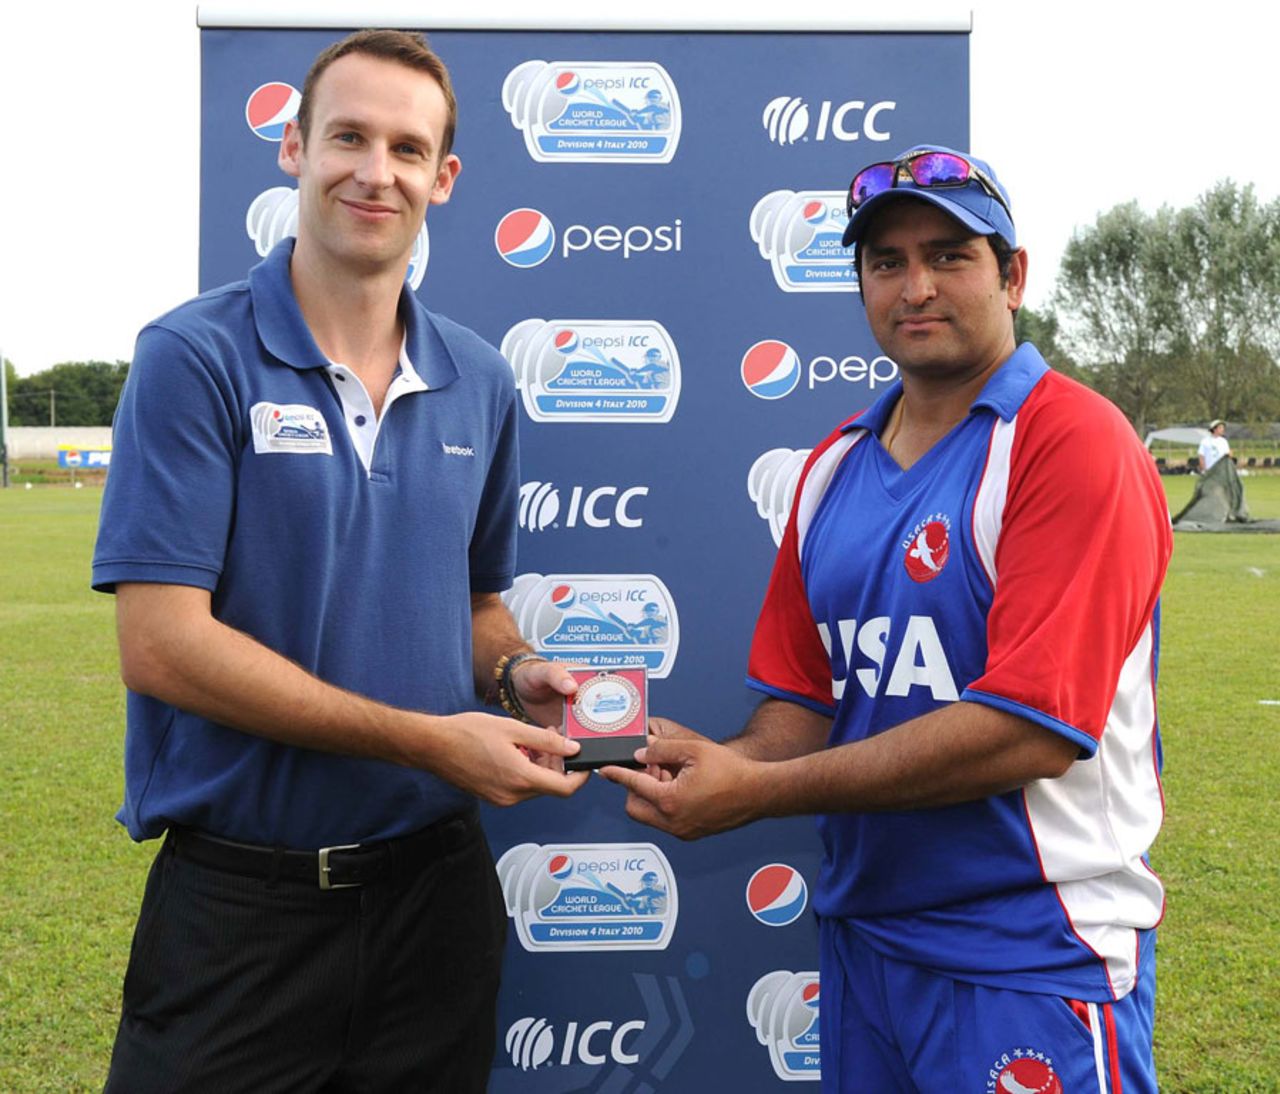 Sushil Nadkarni earned his second successive Man-of-the-Match award, Cayman Islands v USA, ICC World Cricket League Division Four, Navile, August 17, 2010